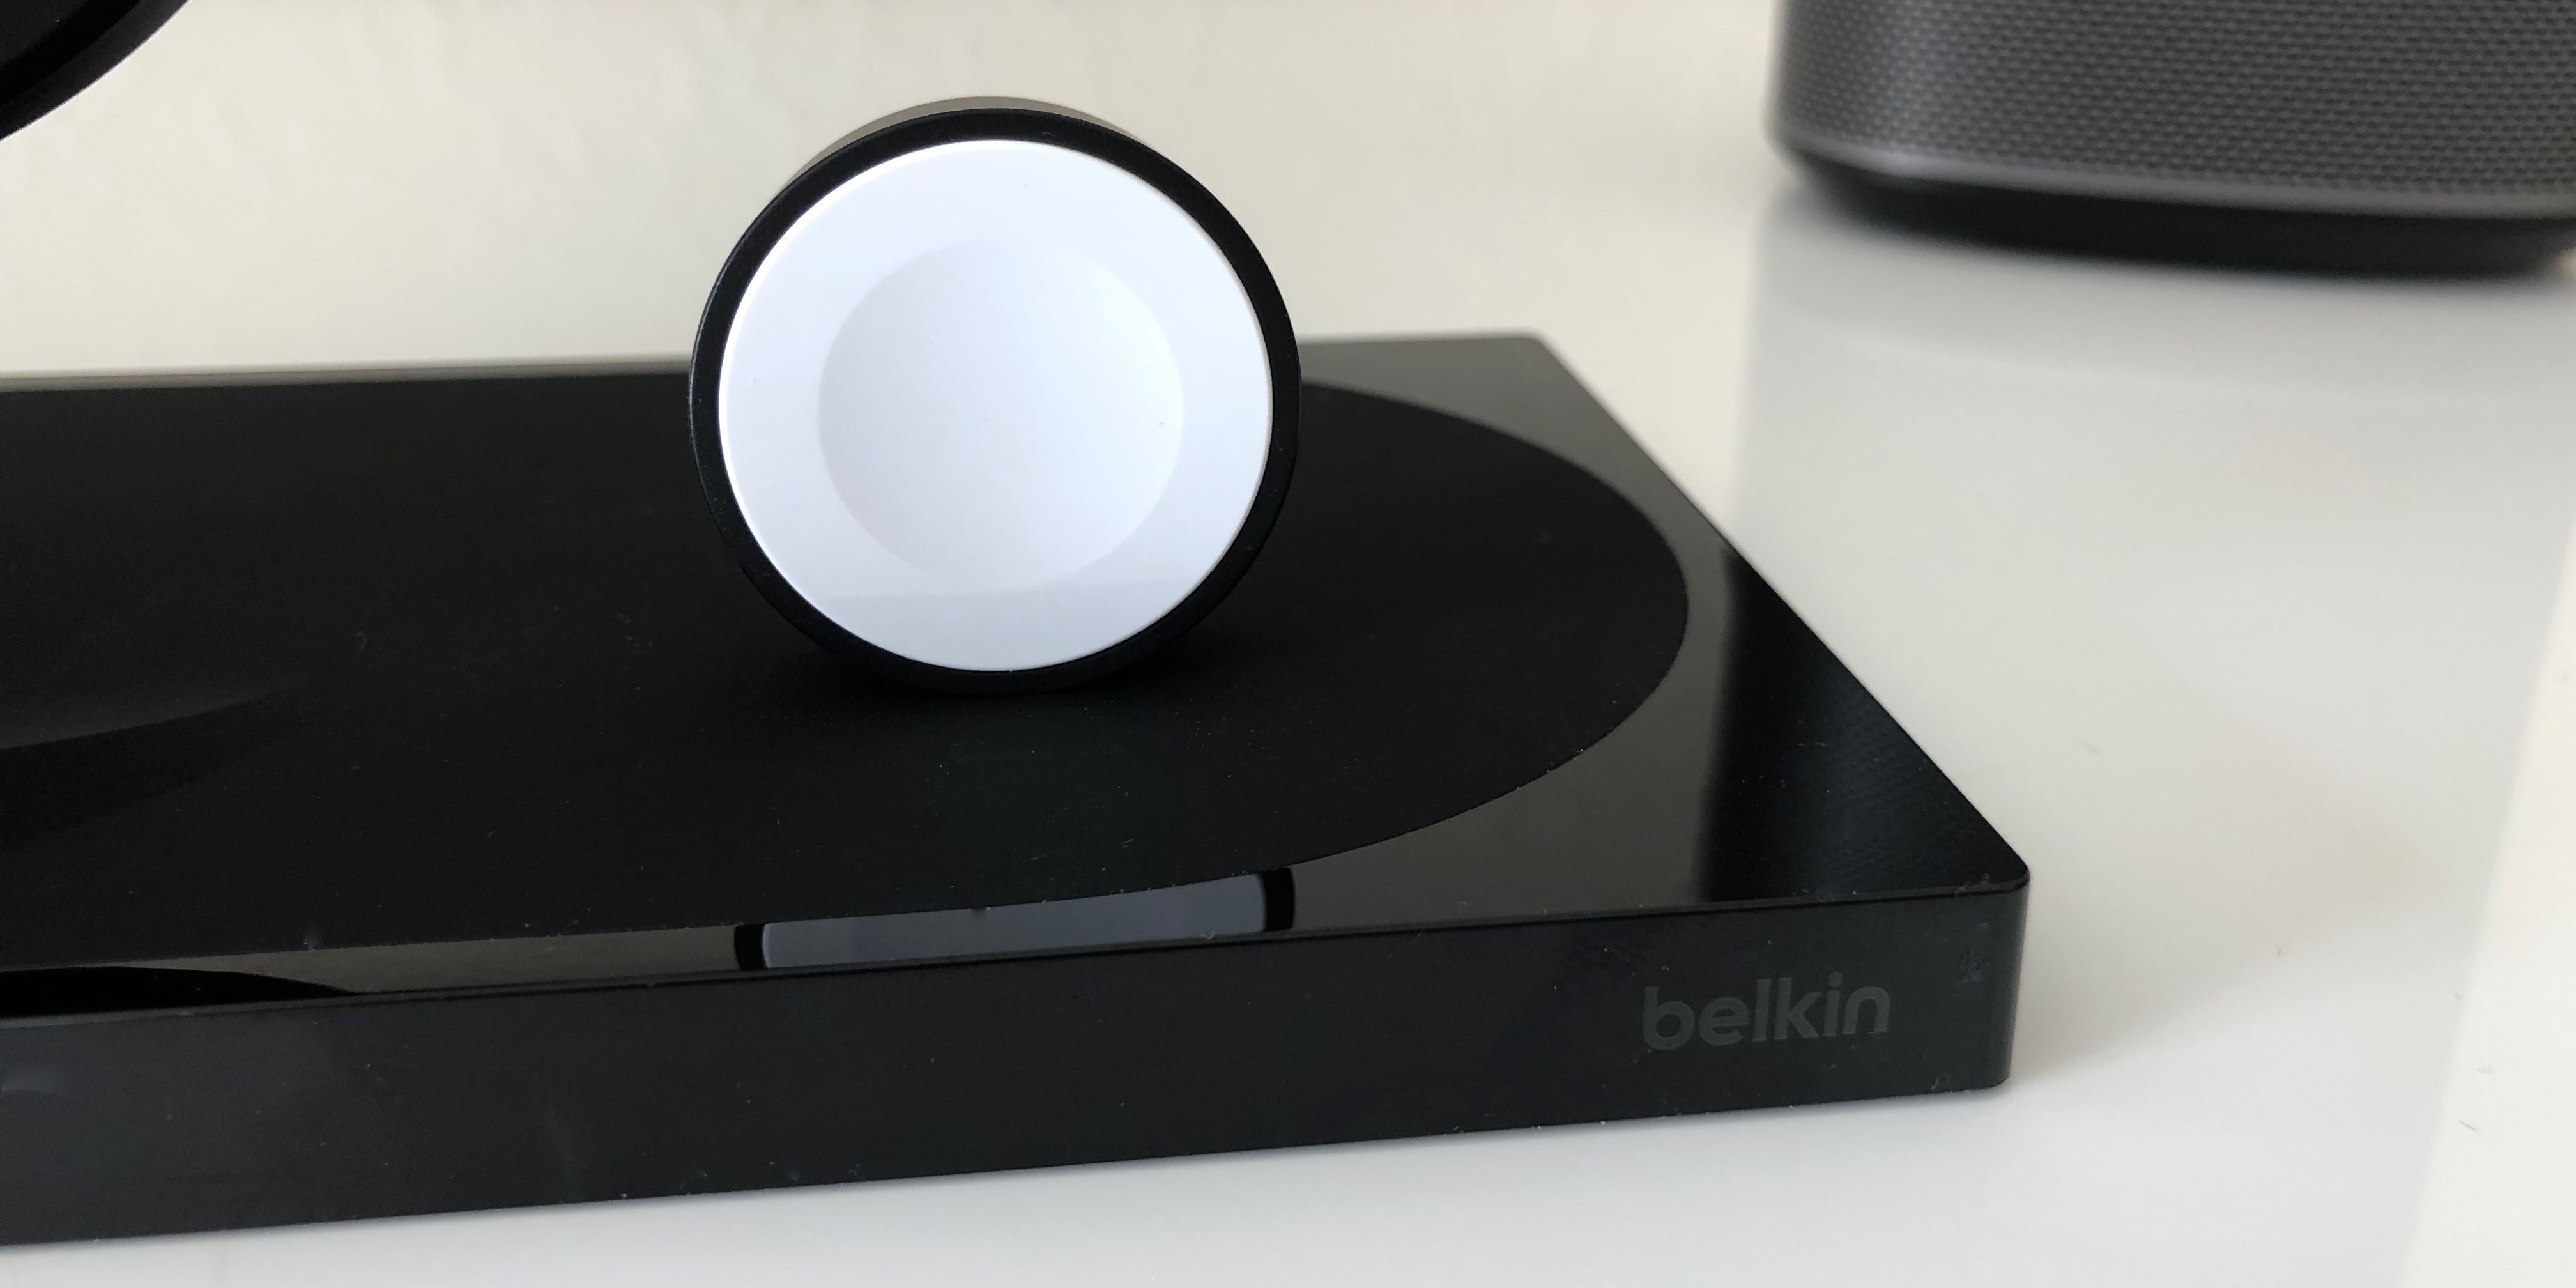 Belkin AirPower wireless charger